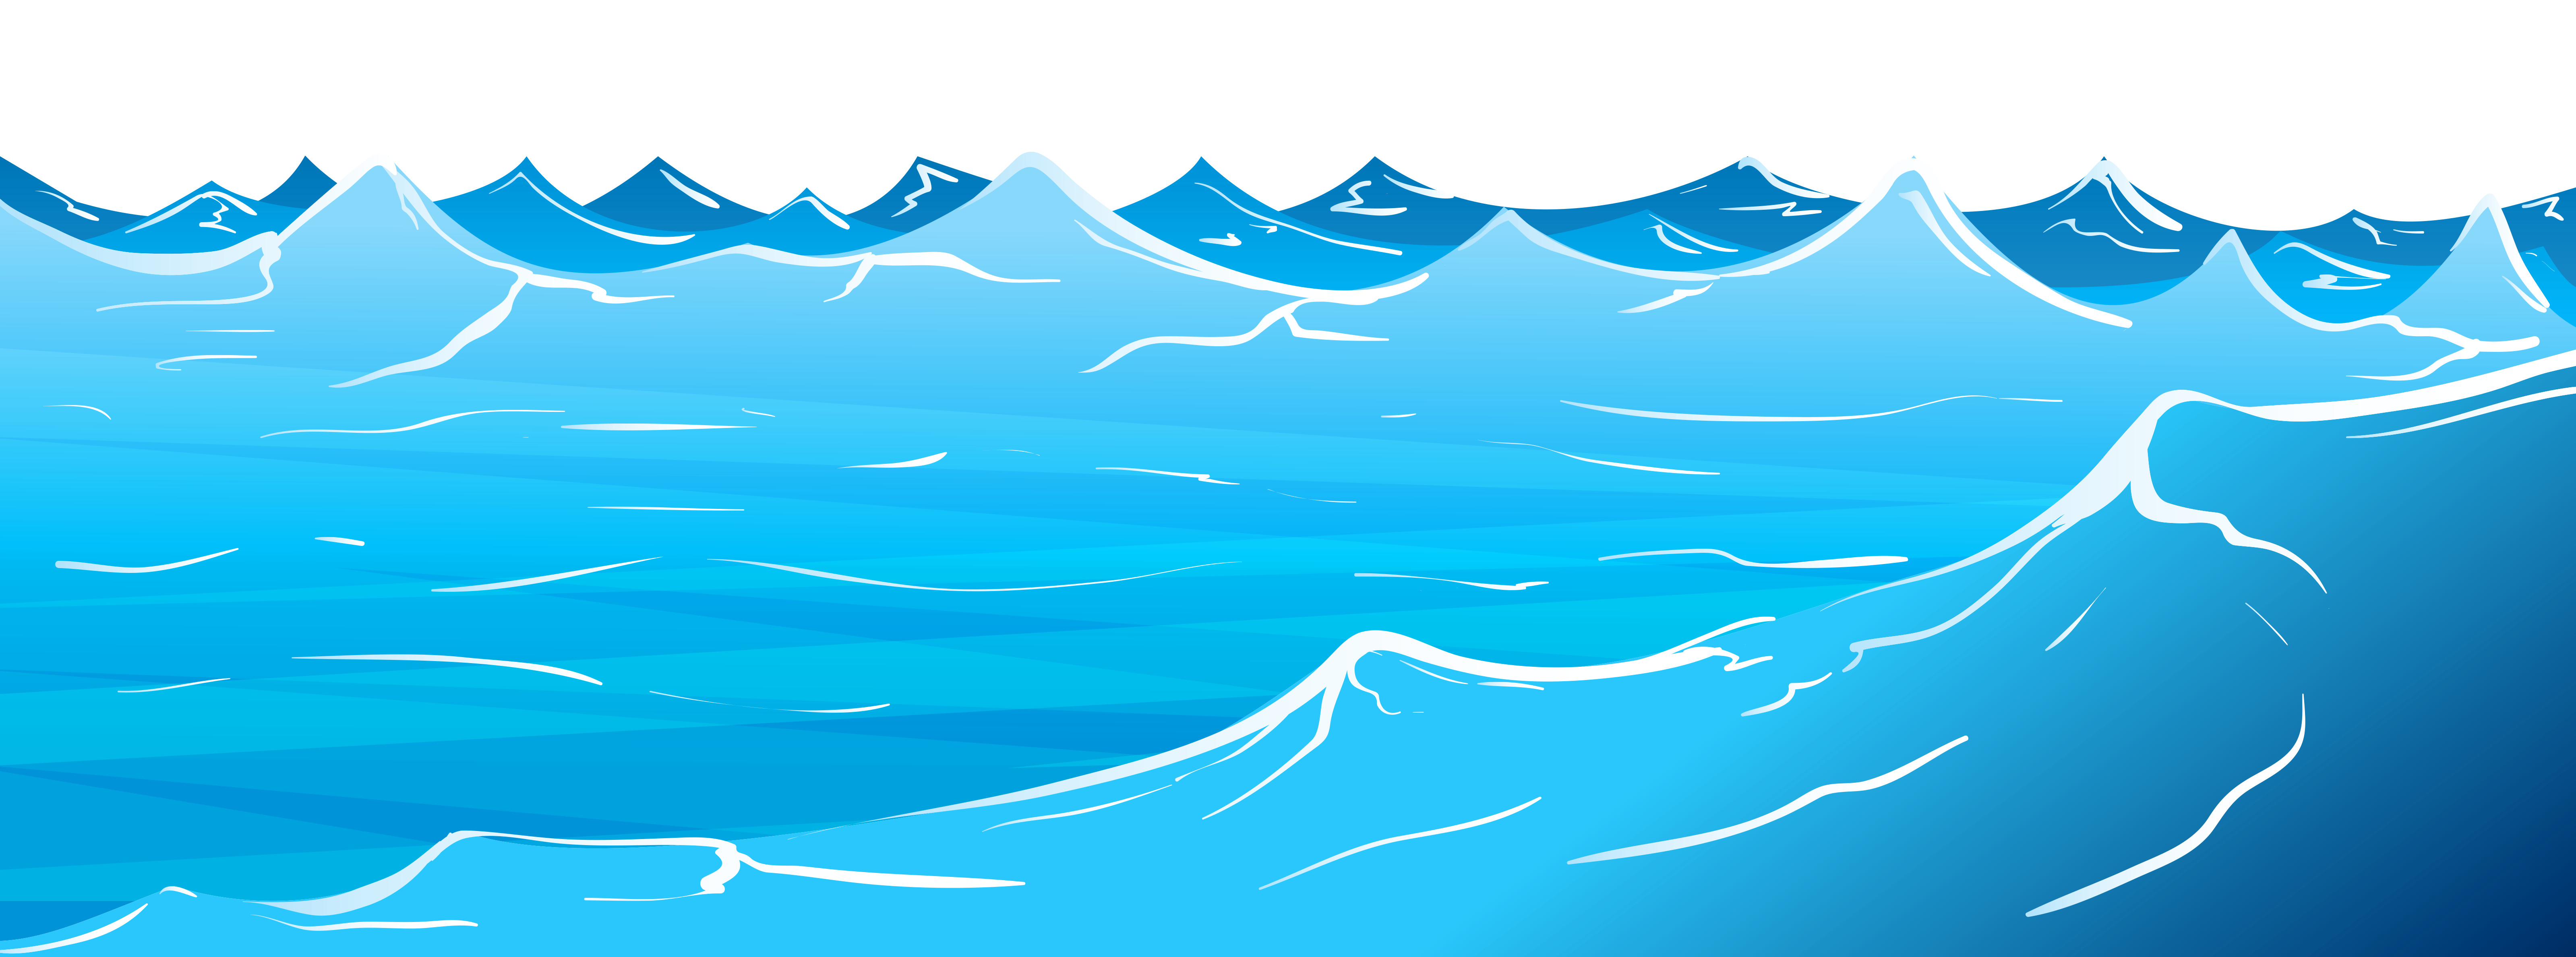 Waves ocean water clipart - Water Waves Clipart